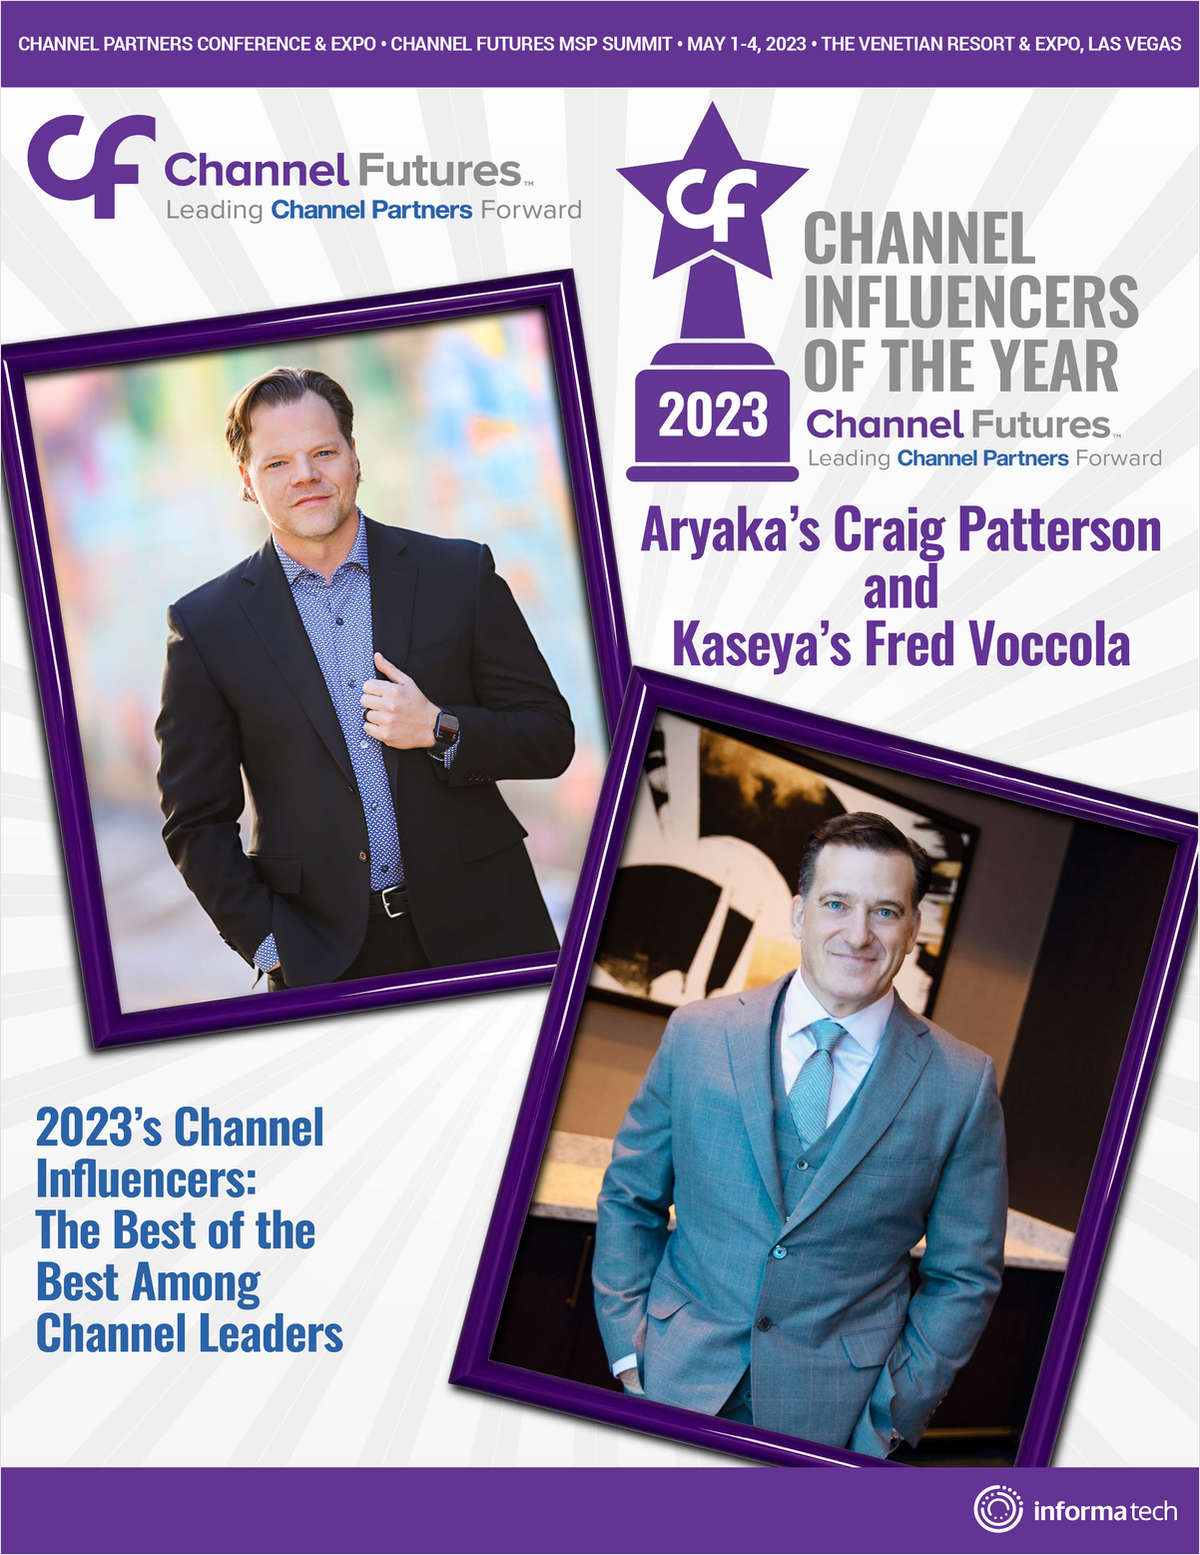 2023 Channel Influencers: The Best of the Best Among Channel Leaders